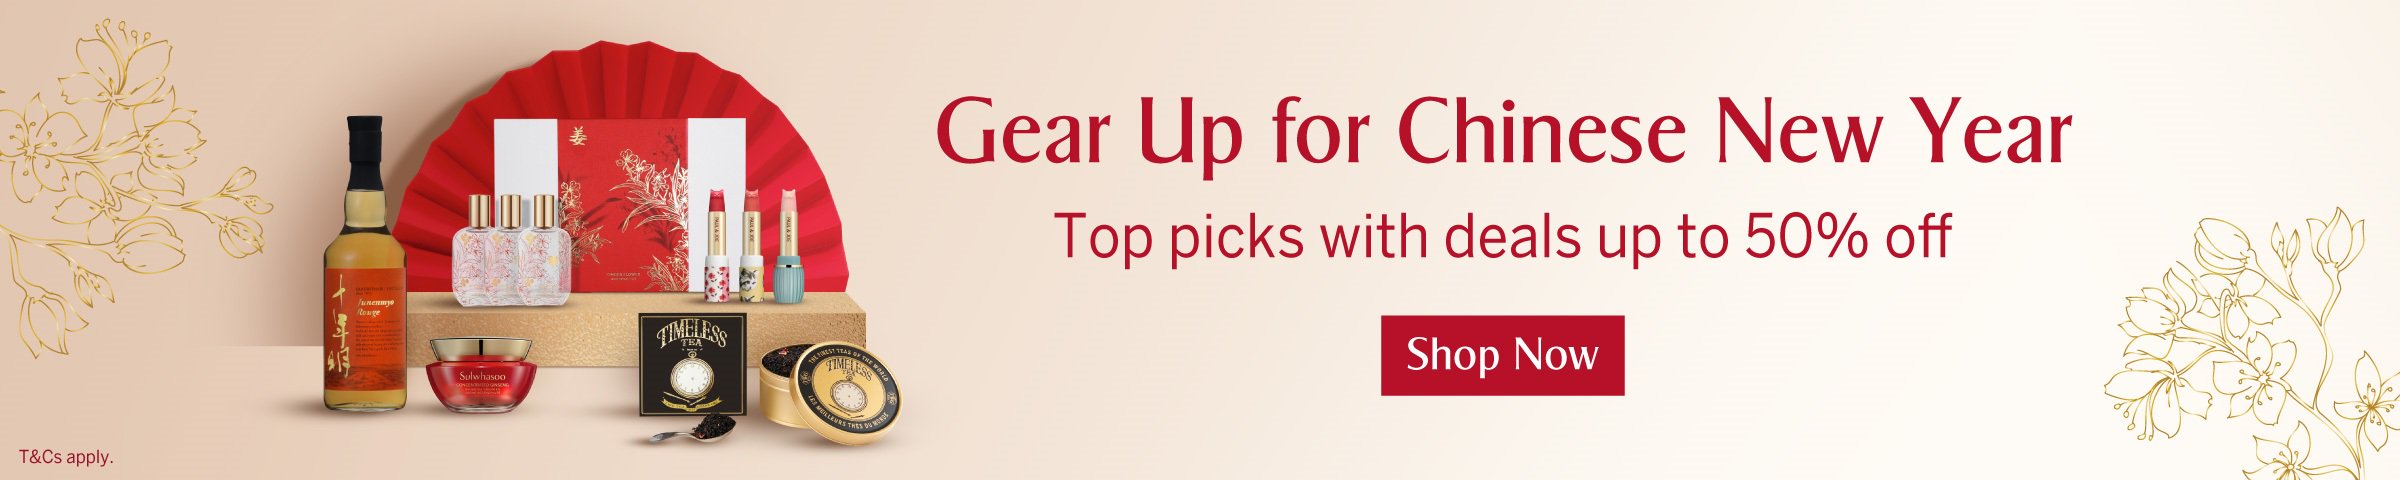 CNY Top picks with deals up to 50% off